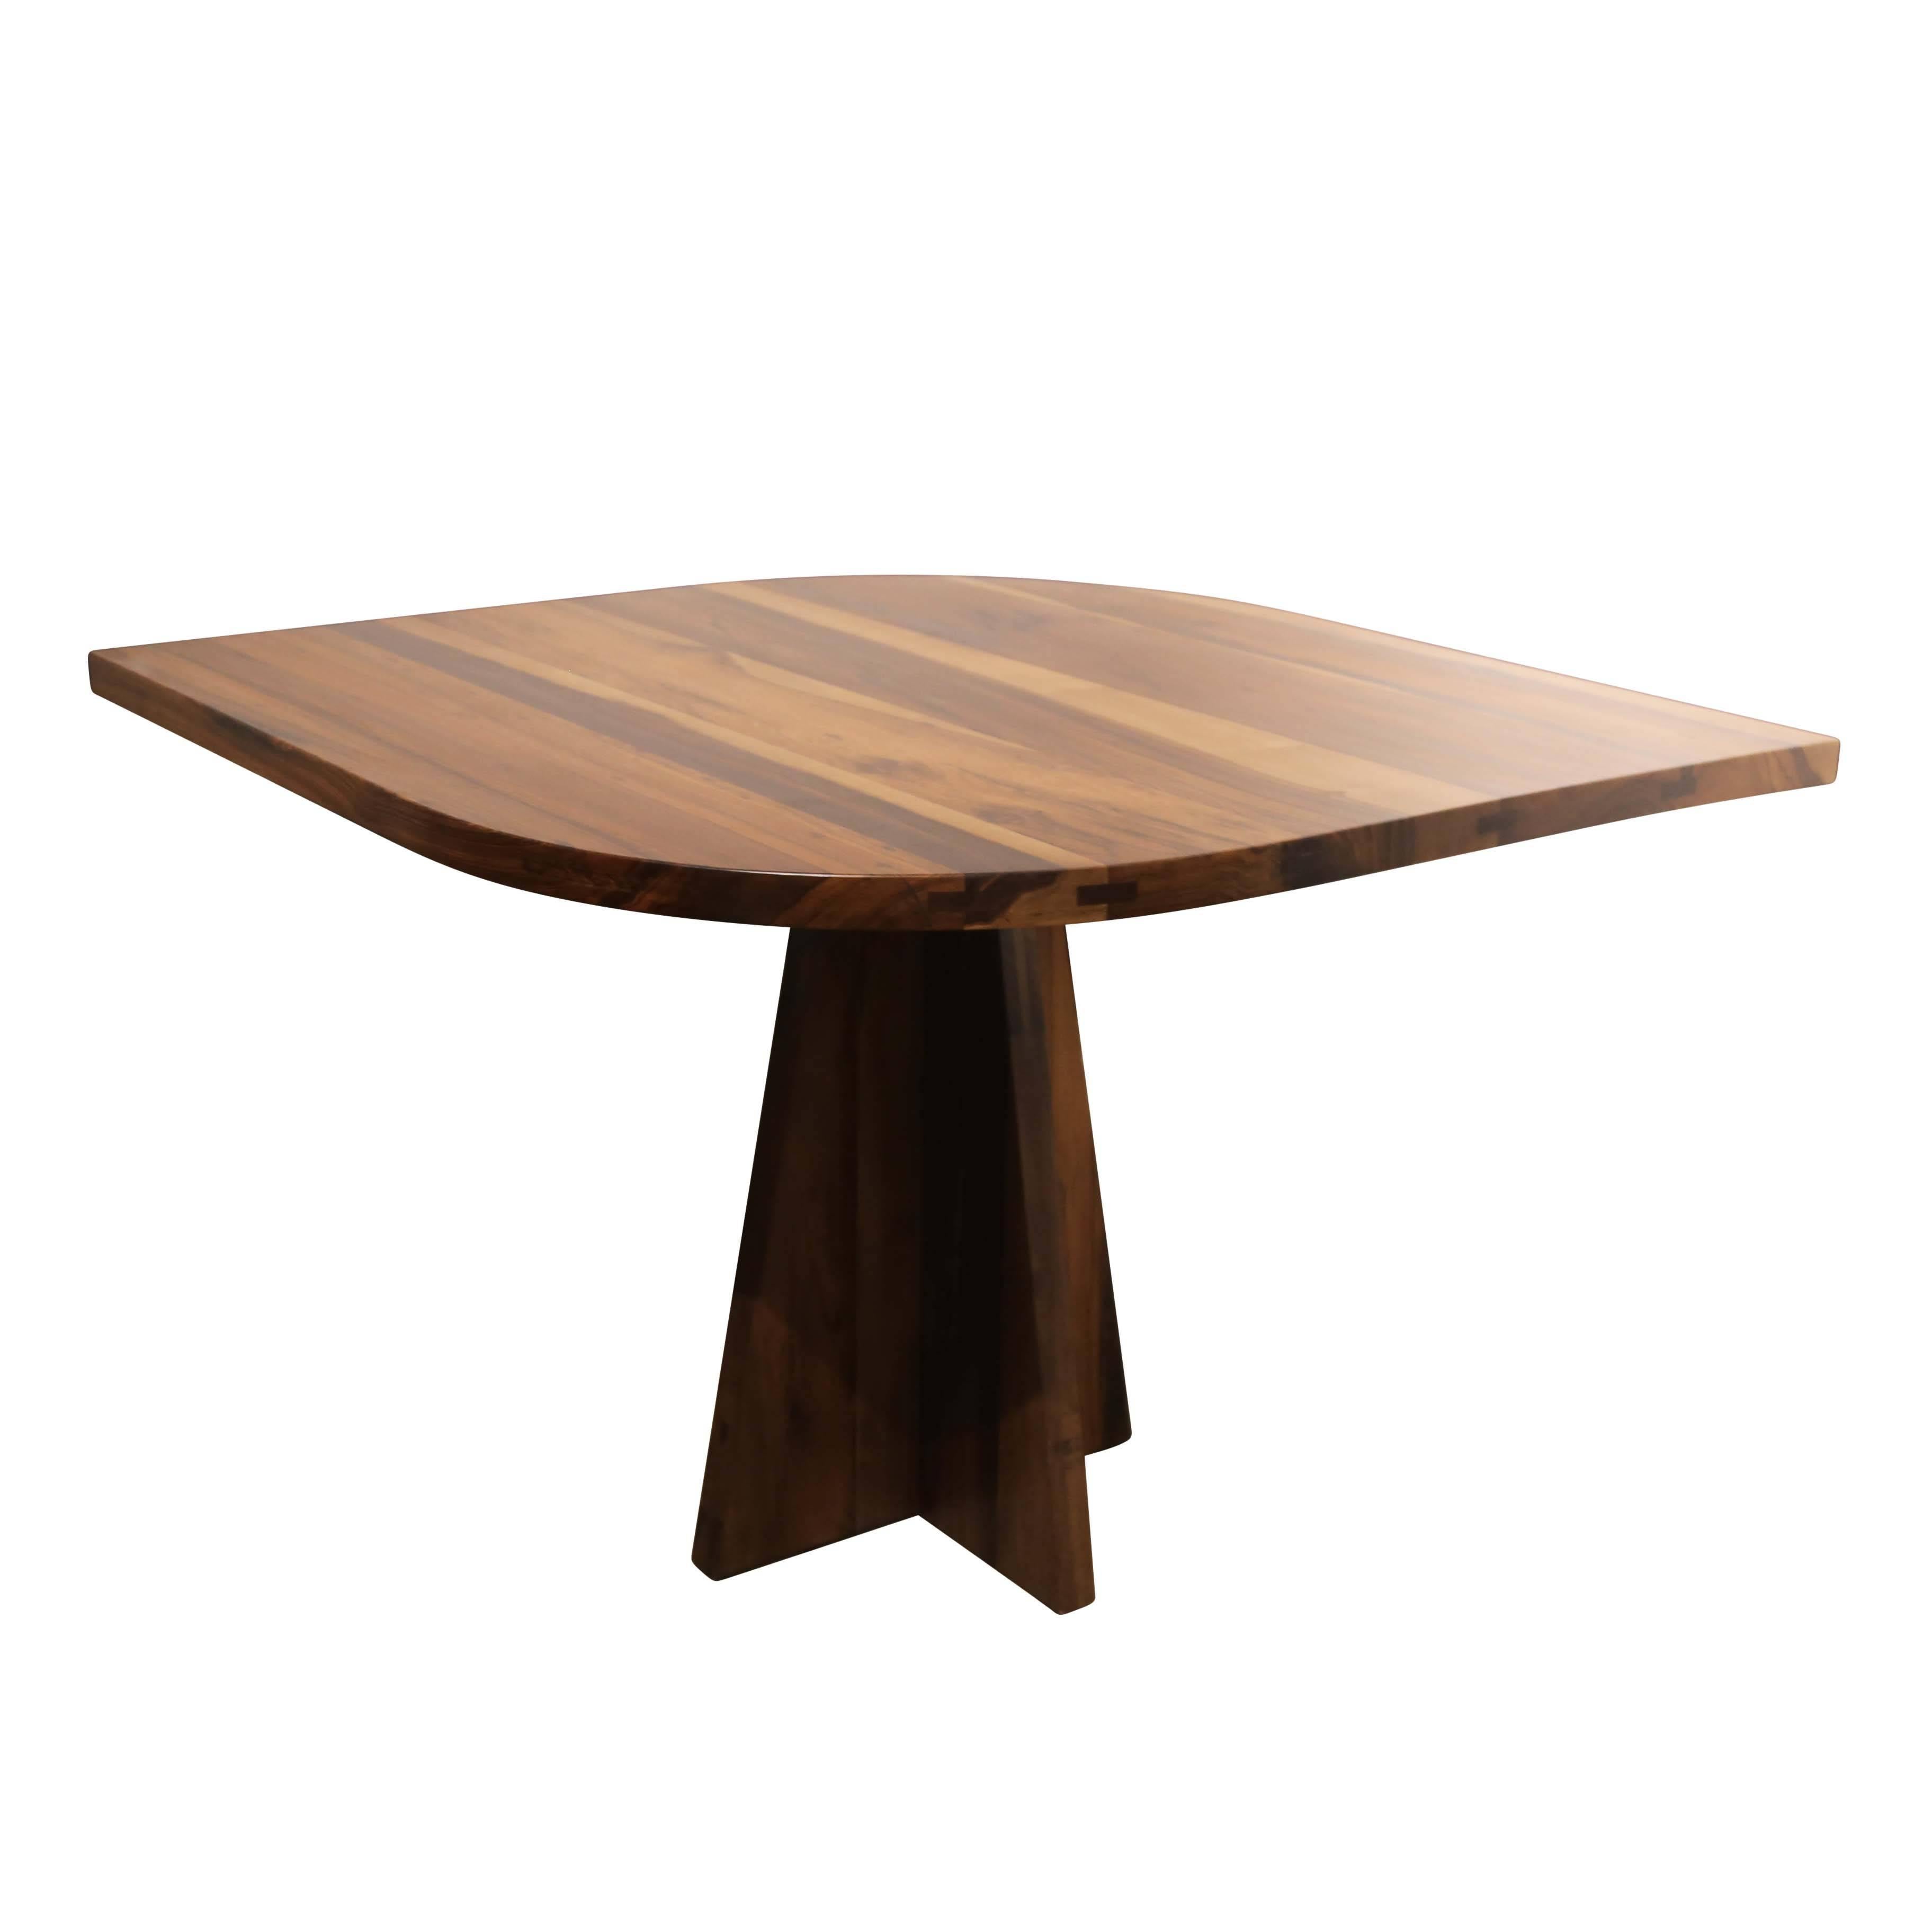 Argentine Contemporary Solid Wood Teardrop Luca Table from Costantini For Sale